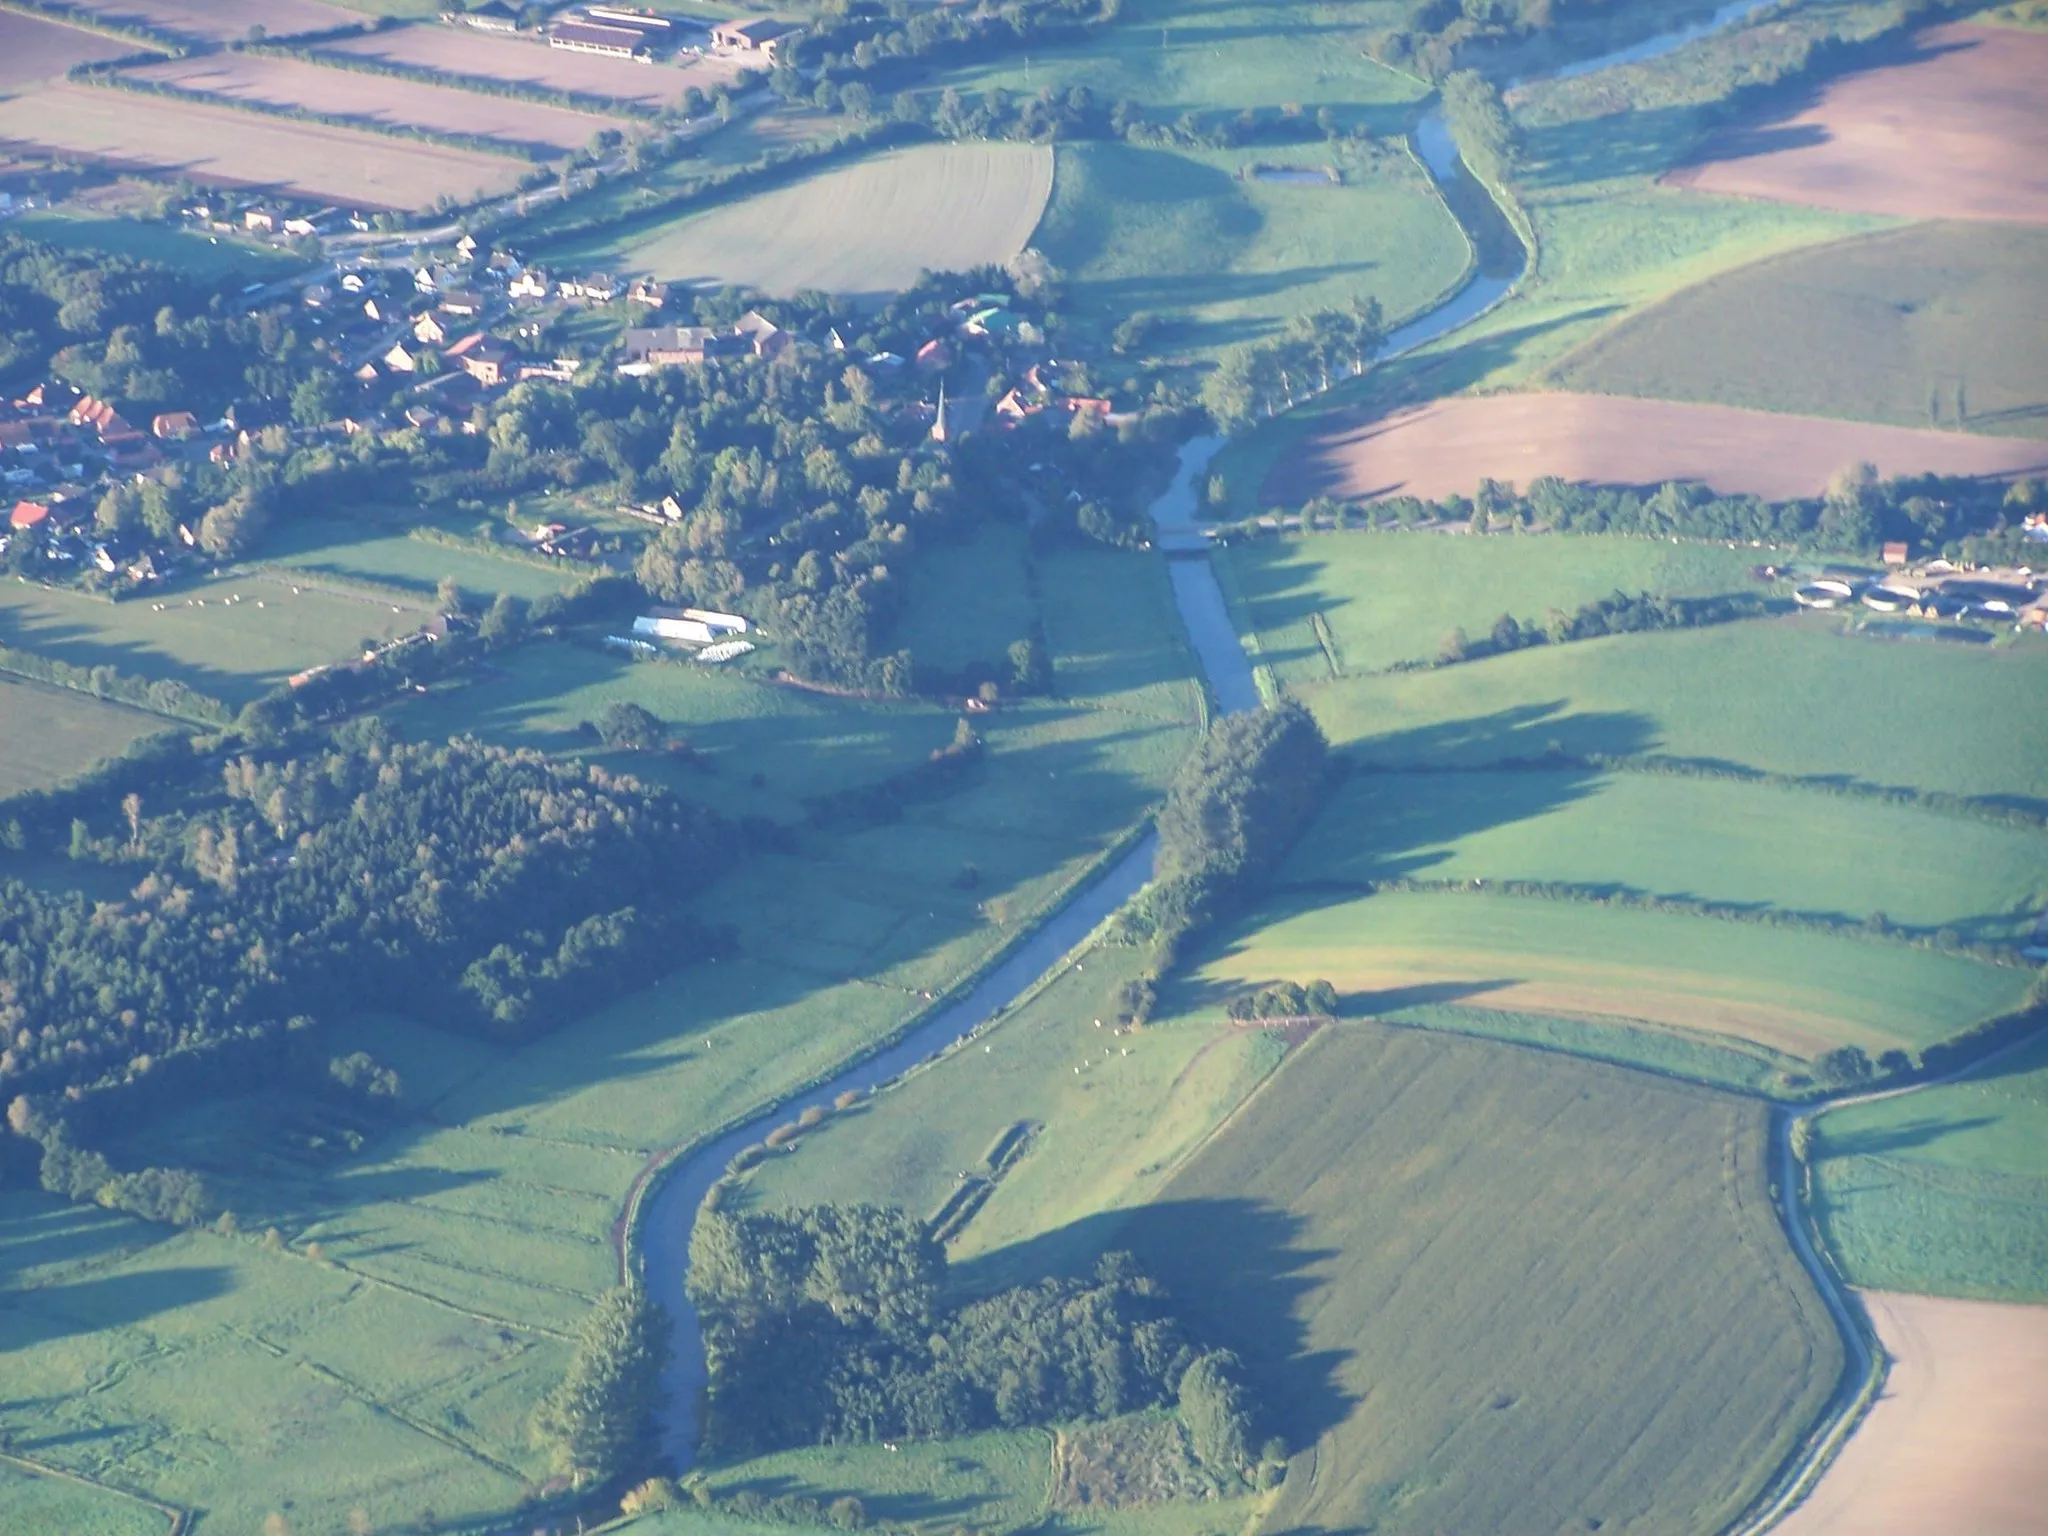 Photo showing: Aerial photo of the Trave river between Wesenberg (right side) and Klein Wesenberg (left side) in northern Germany.